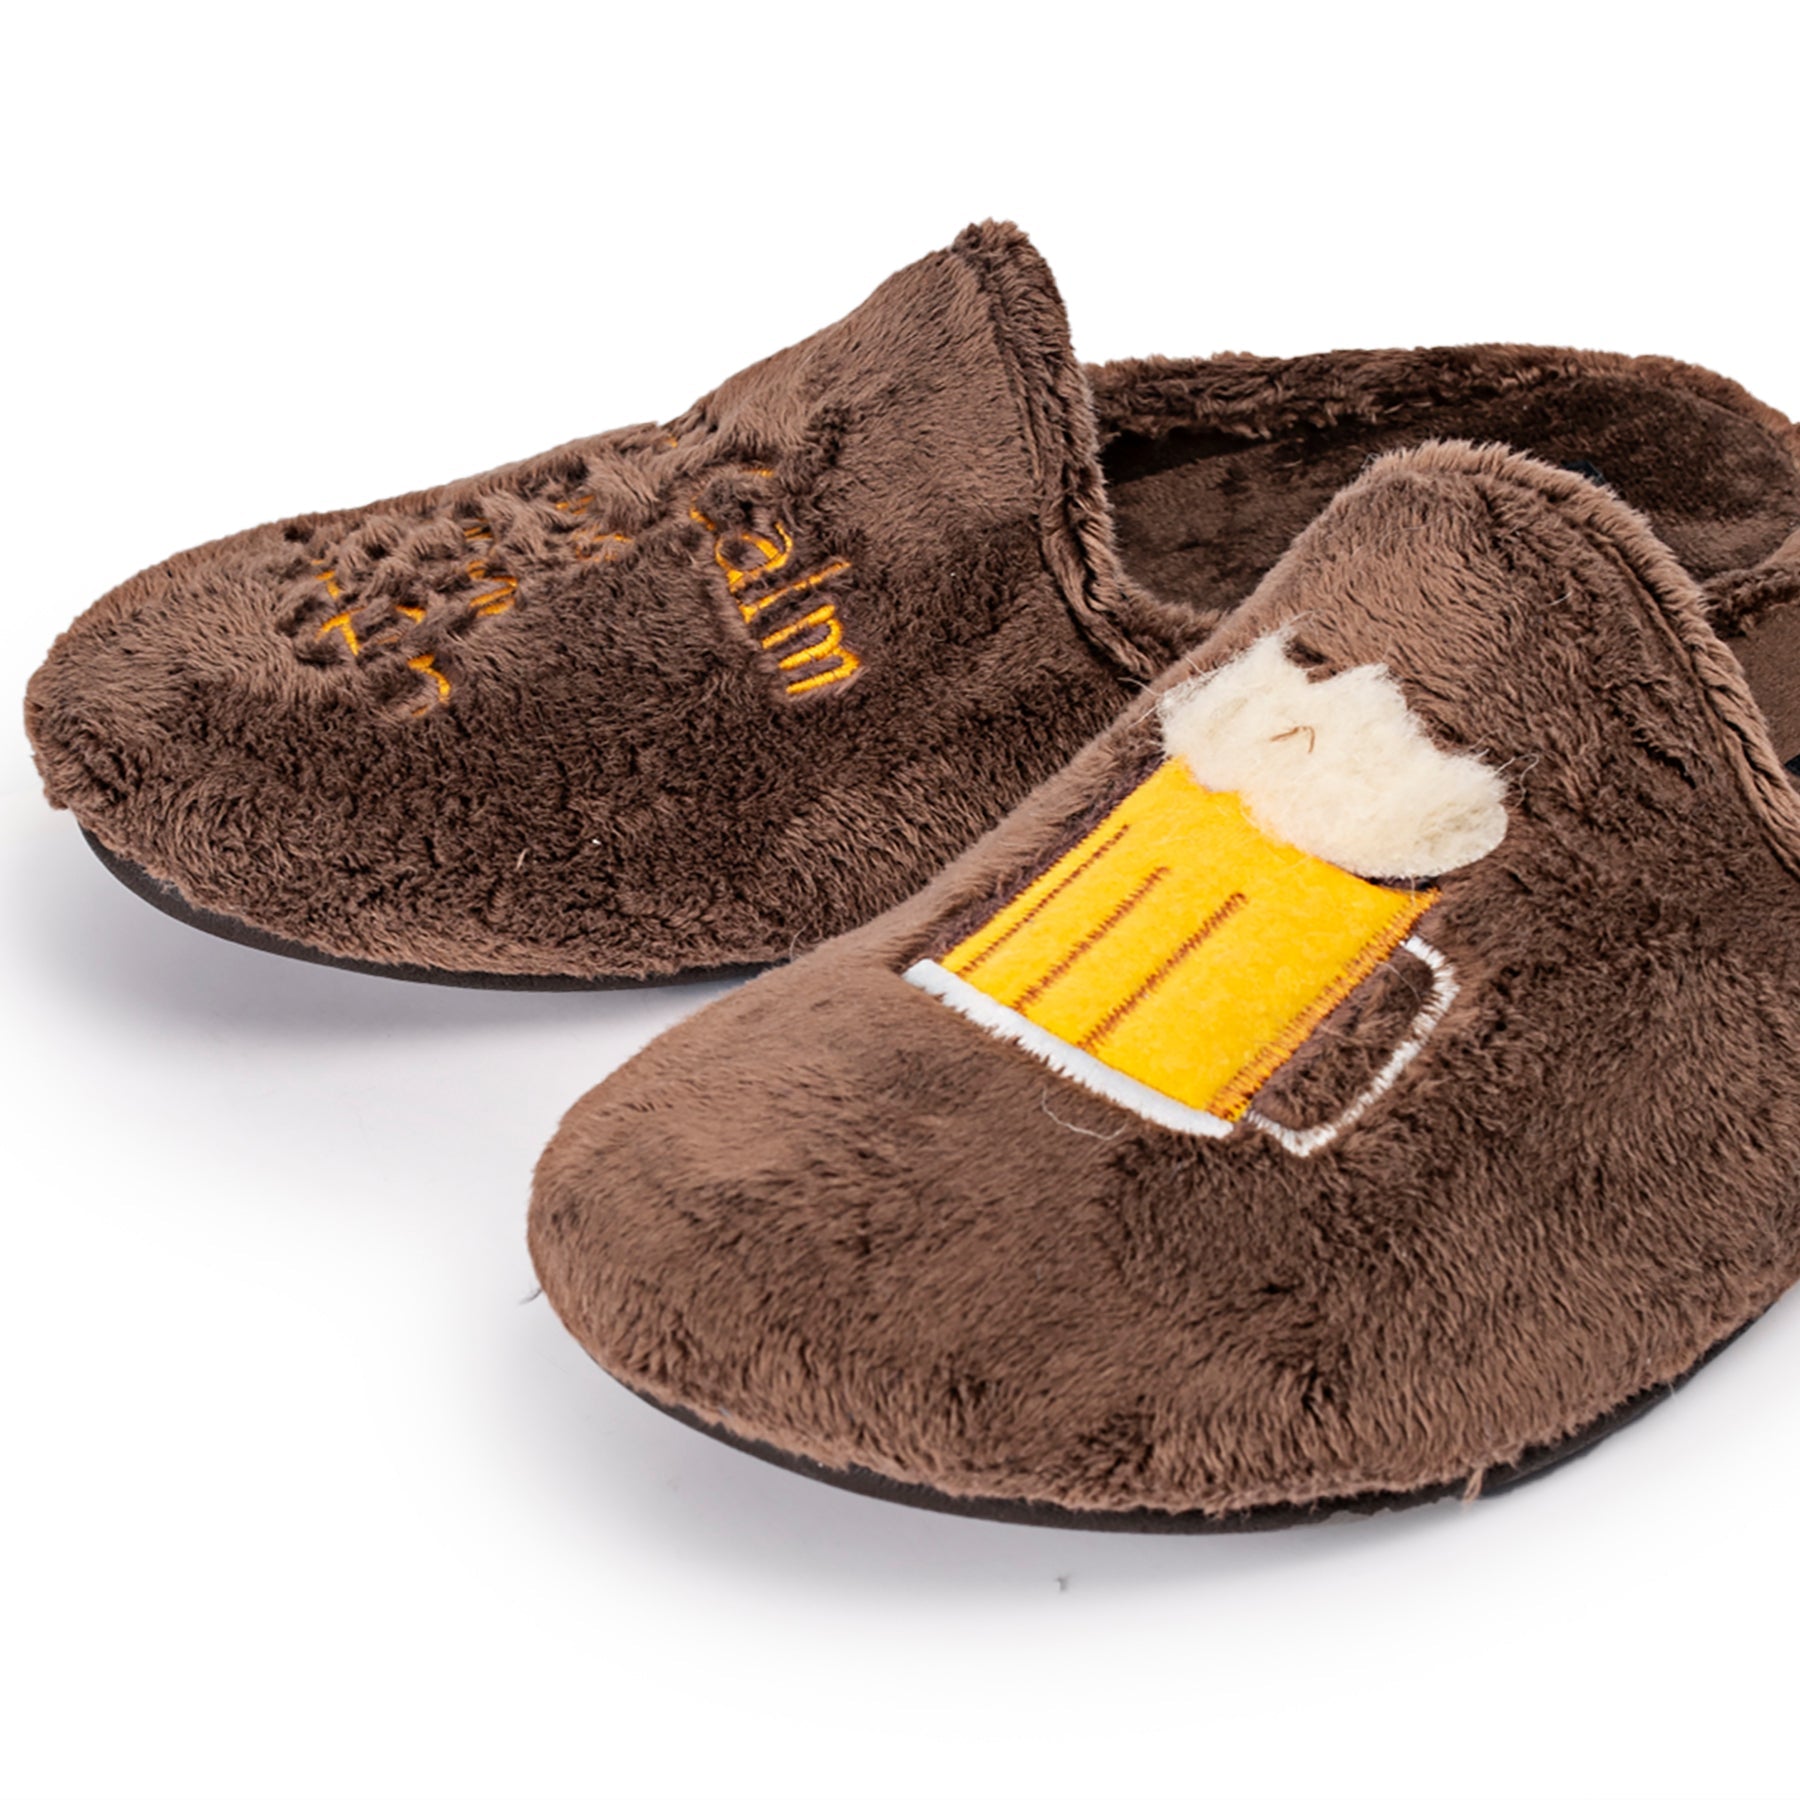 Slippers "Keep Calm and Drink Beer" Marrón - PACK